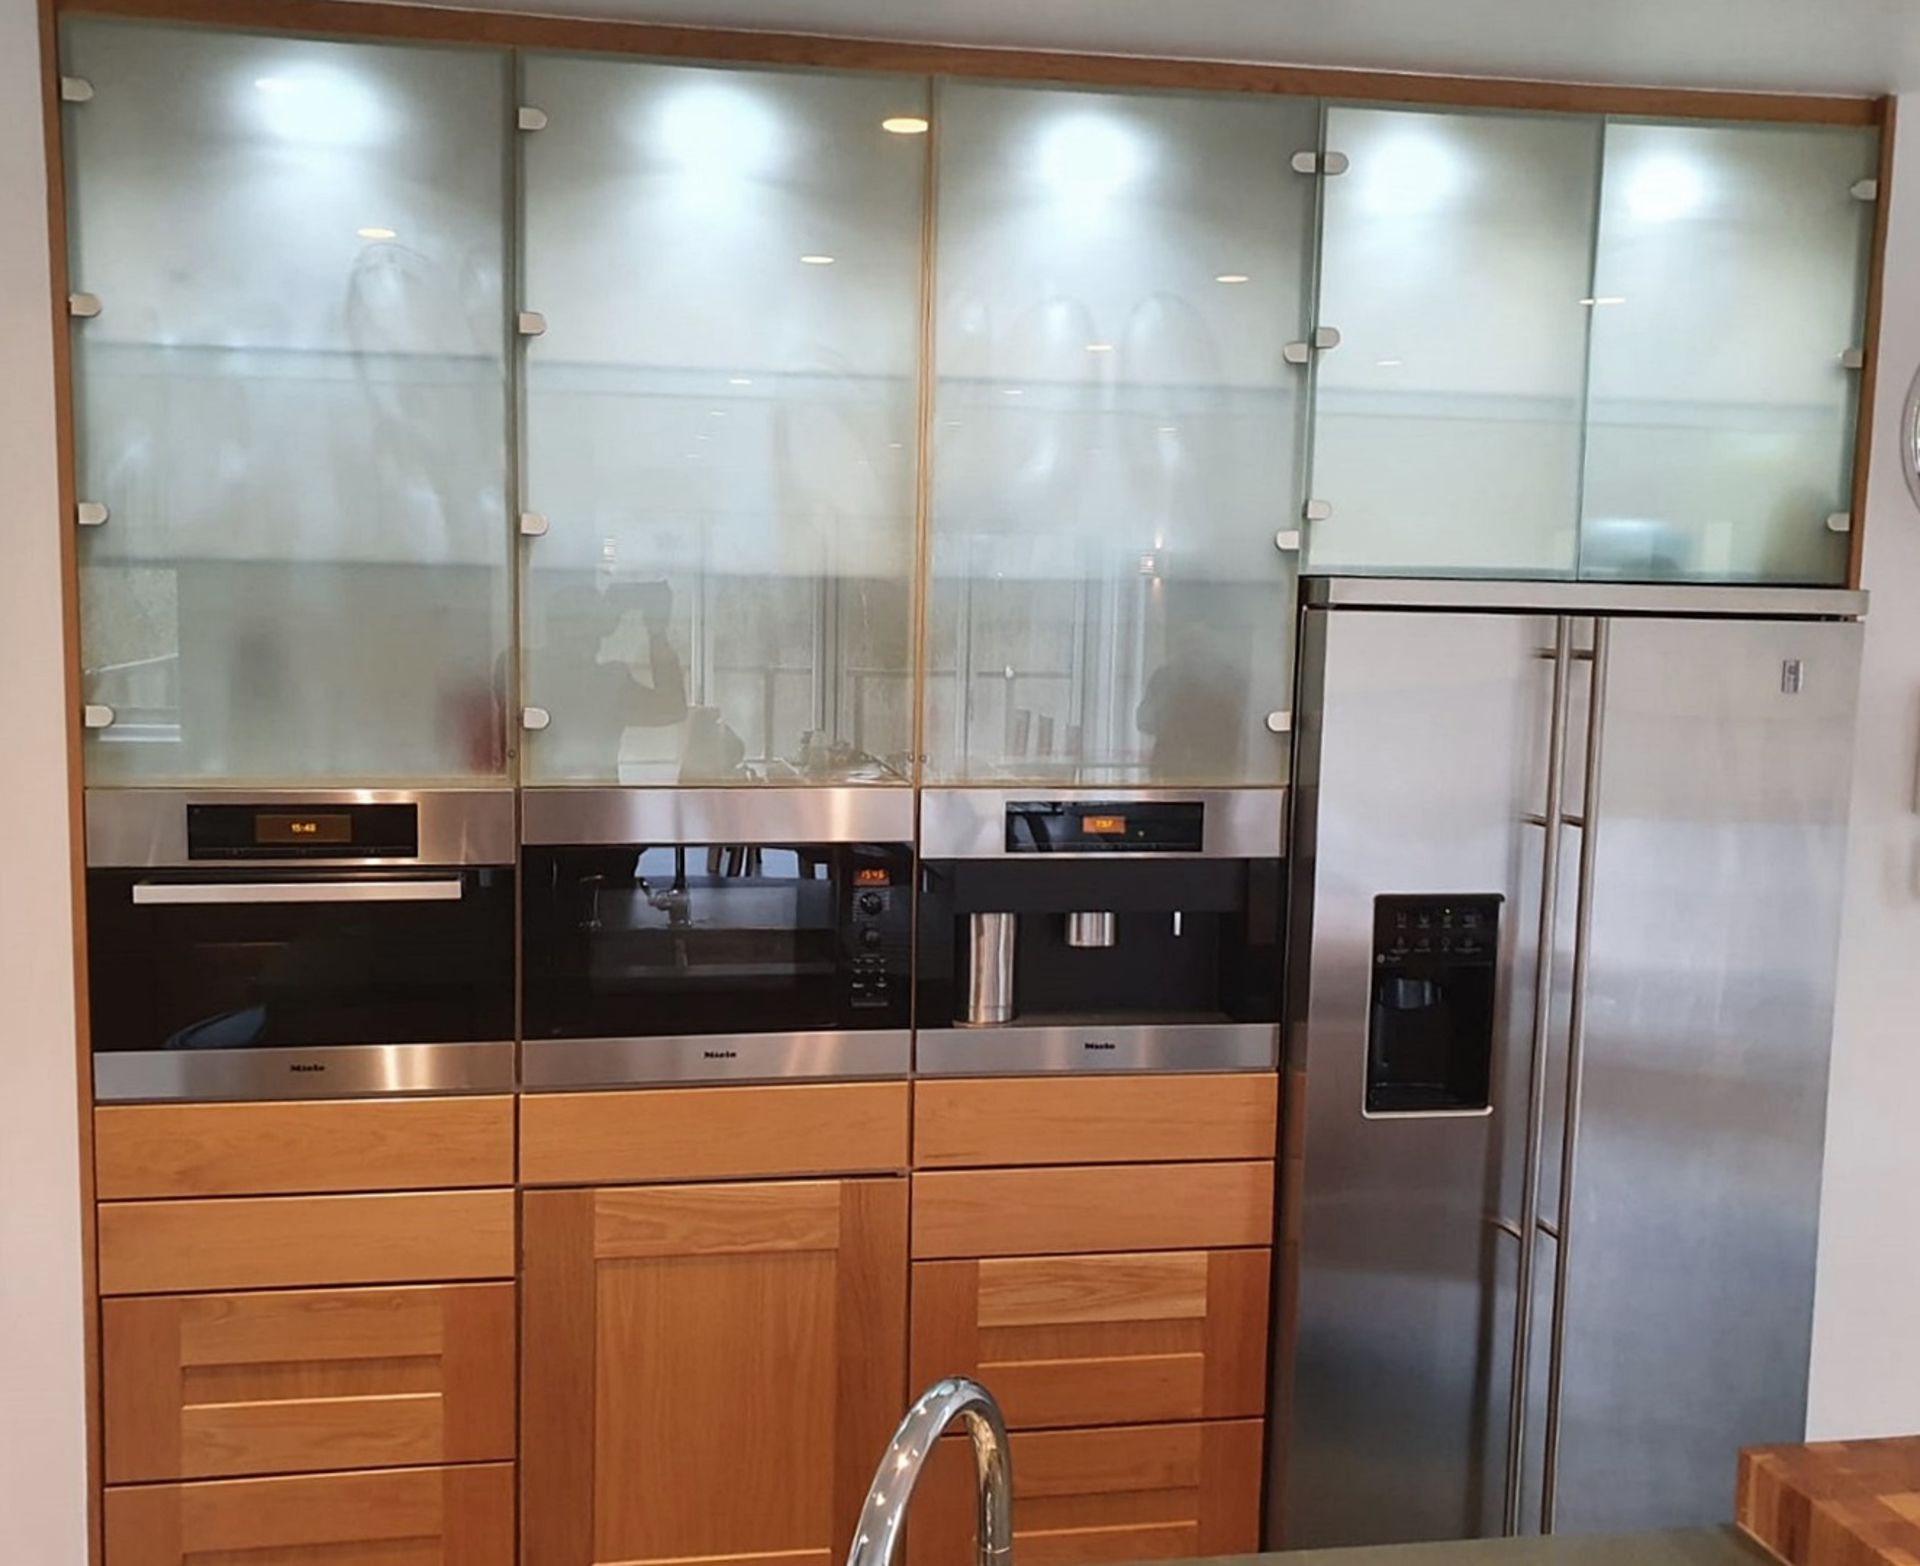 1 x Solid Oak Fitted Kitchen With Integrated Miele Appliances - CL487 - Location: Wigan *NO VAT* - Image 42 of 82